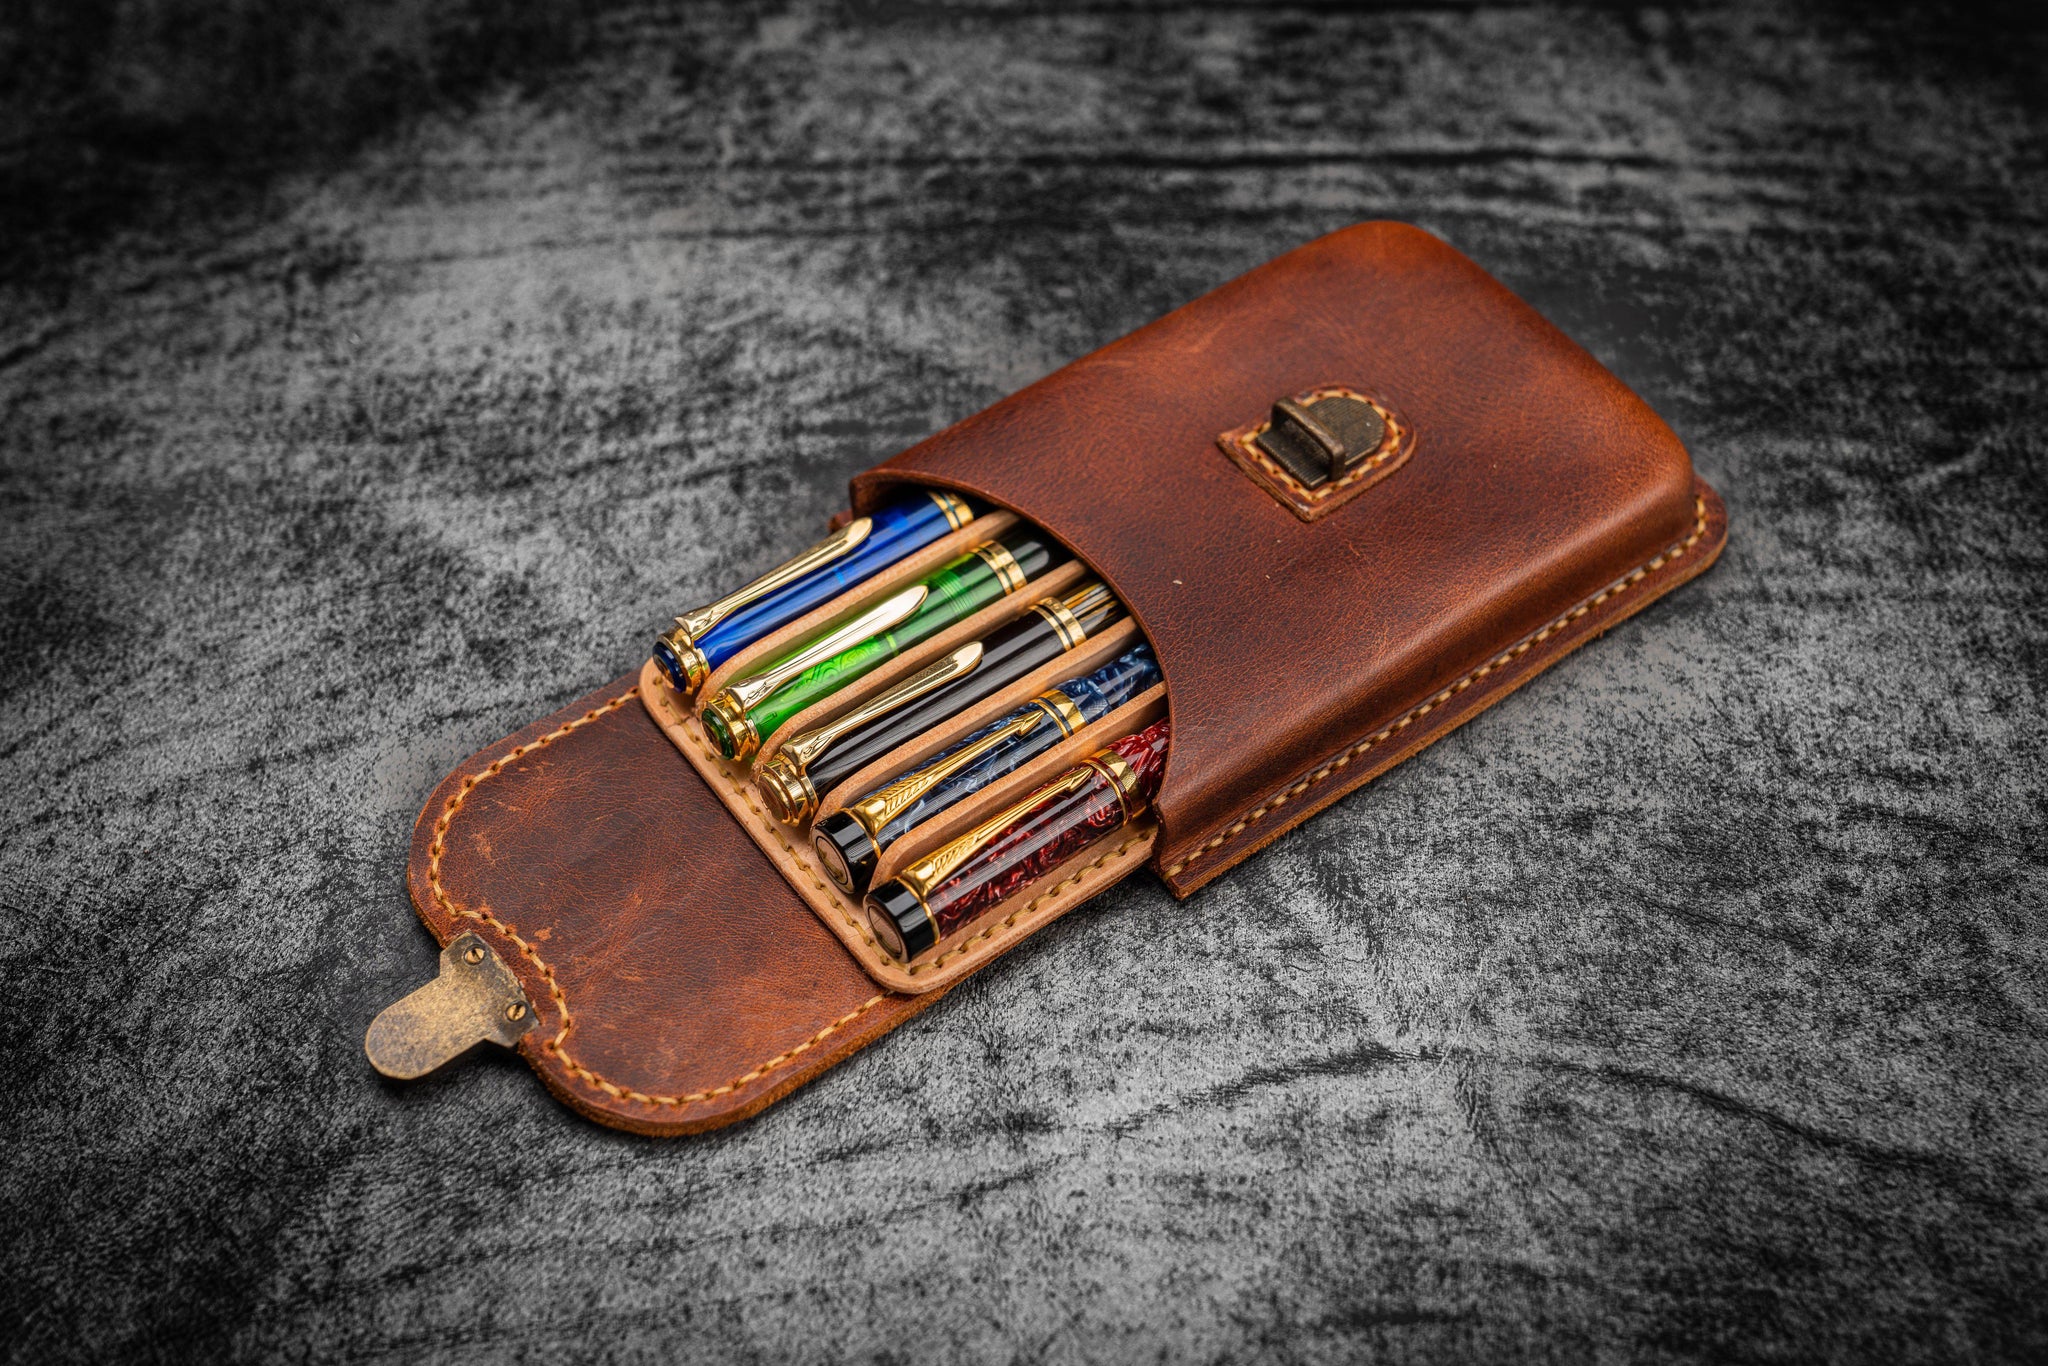 Handmade Leather Pen Roll - Galen Leather